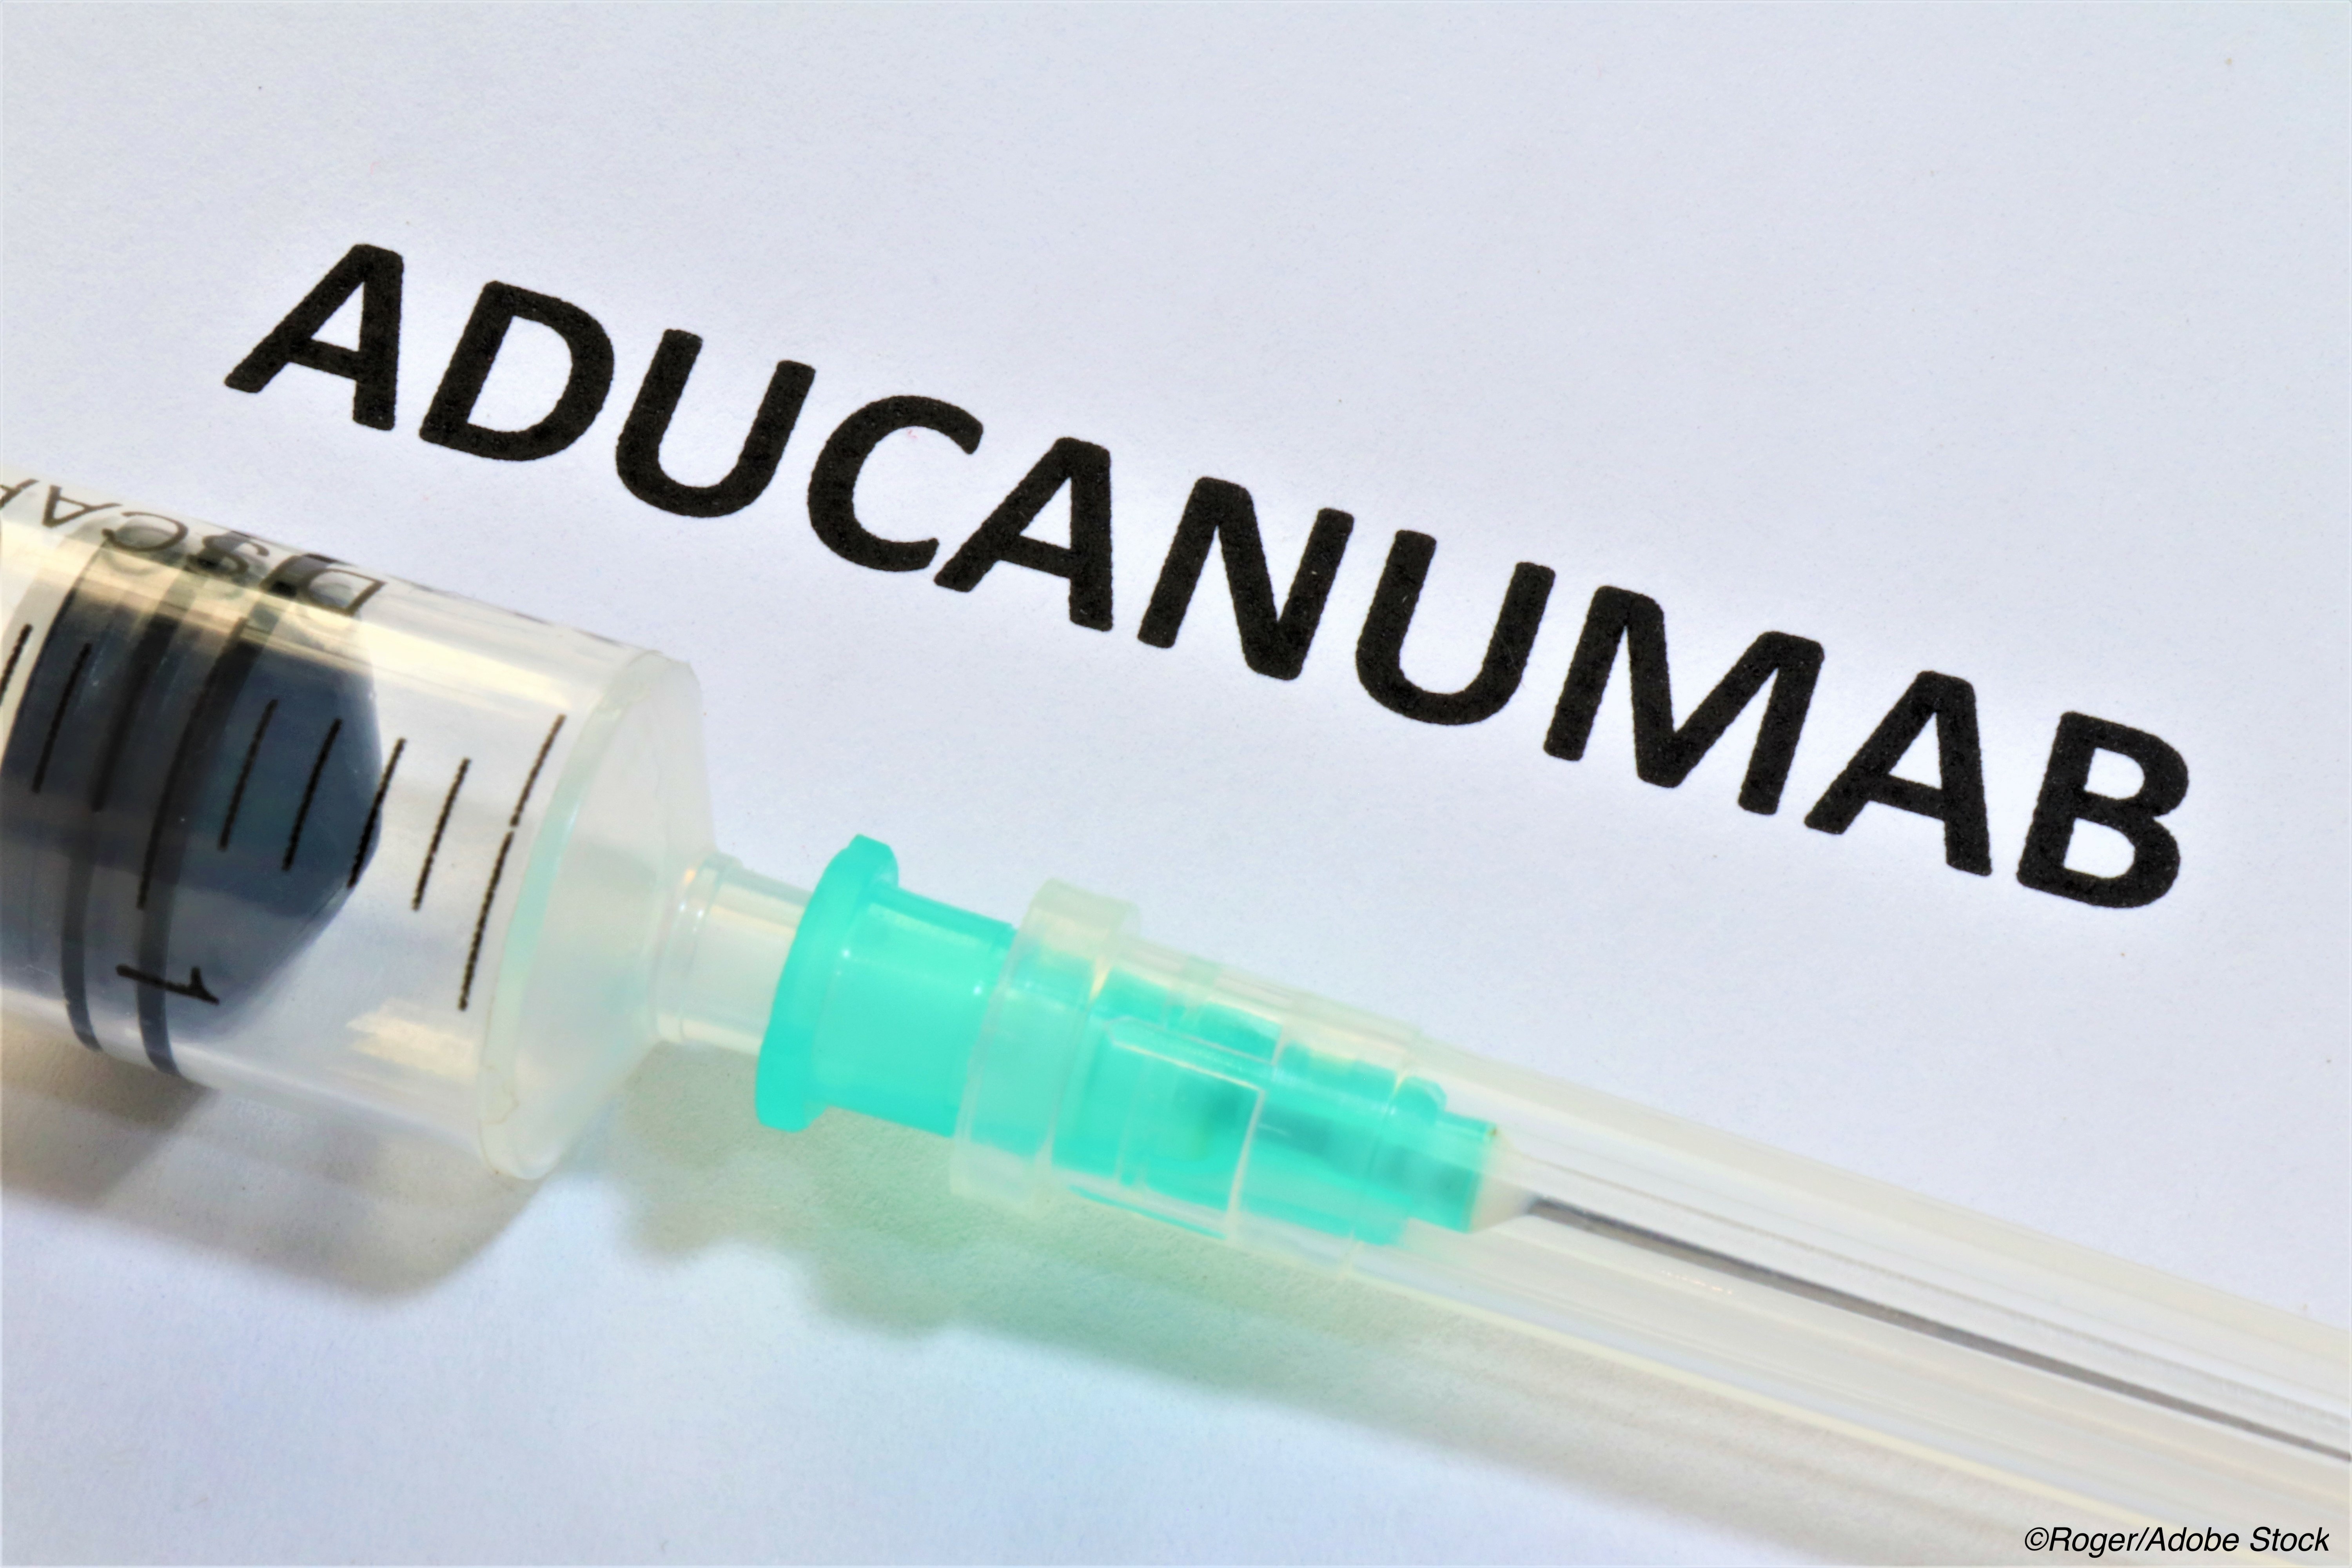 In a No Holds Barred Statement, the American Academy of Neurology Offers Advice for Members on Prescribing Aducanumab